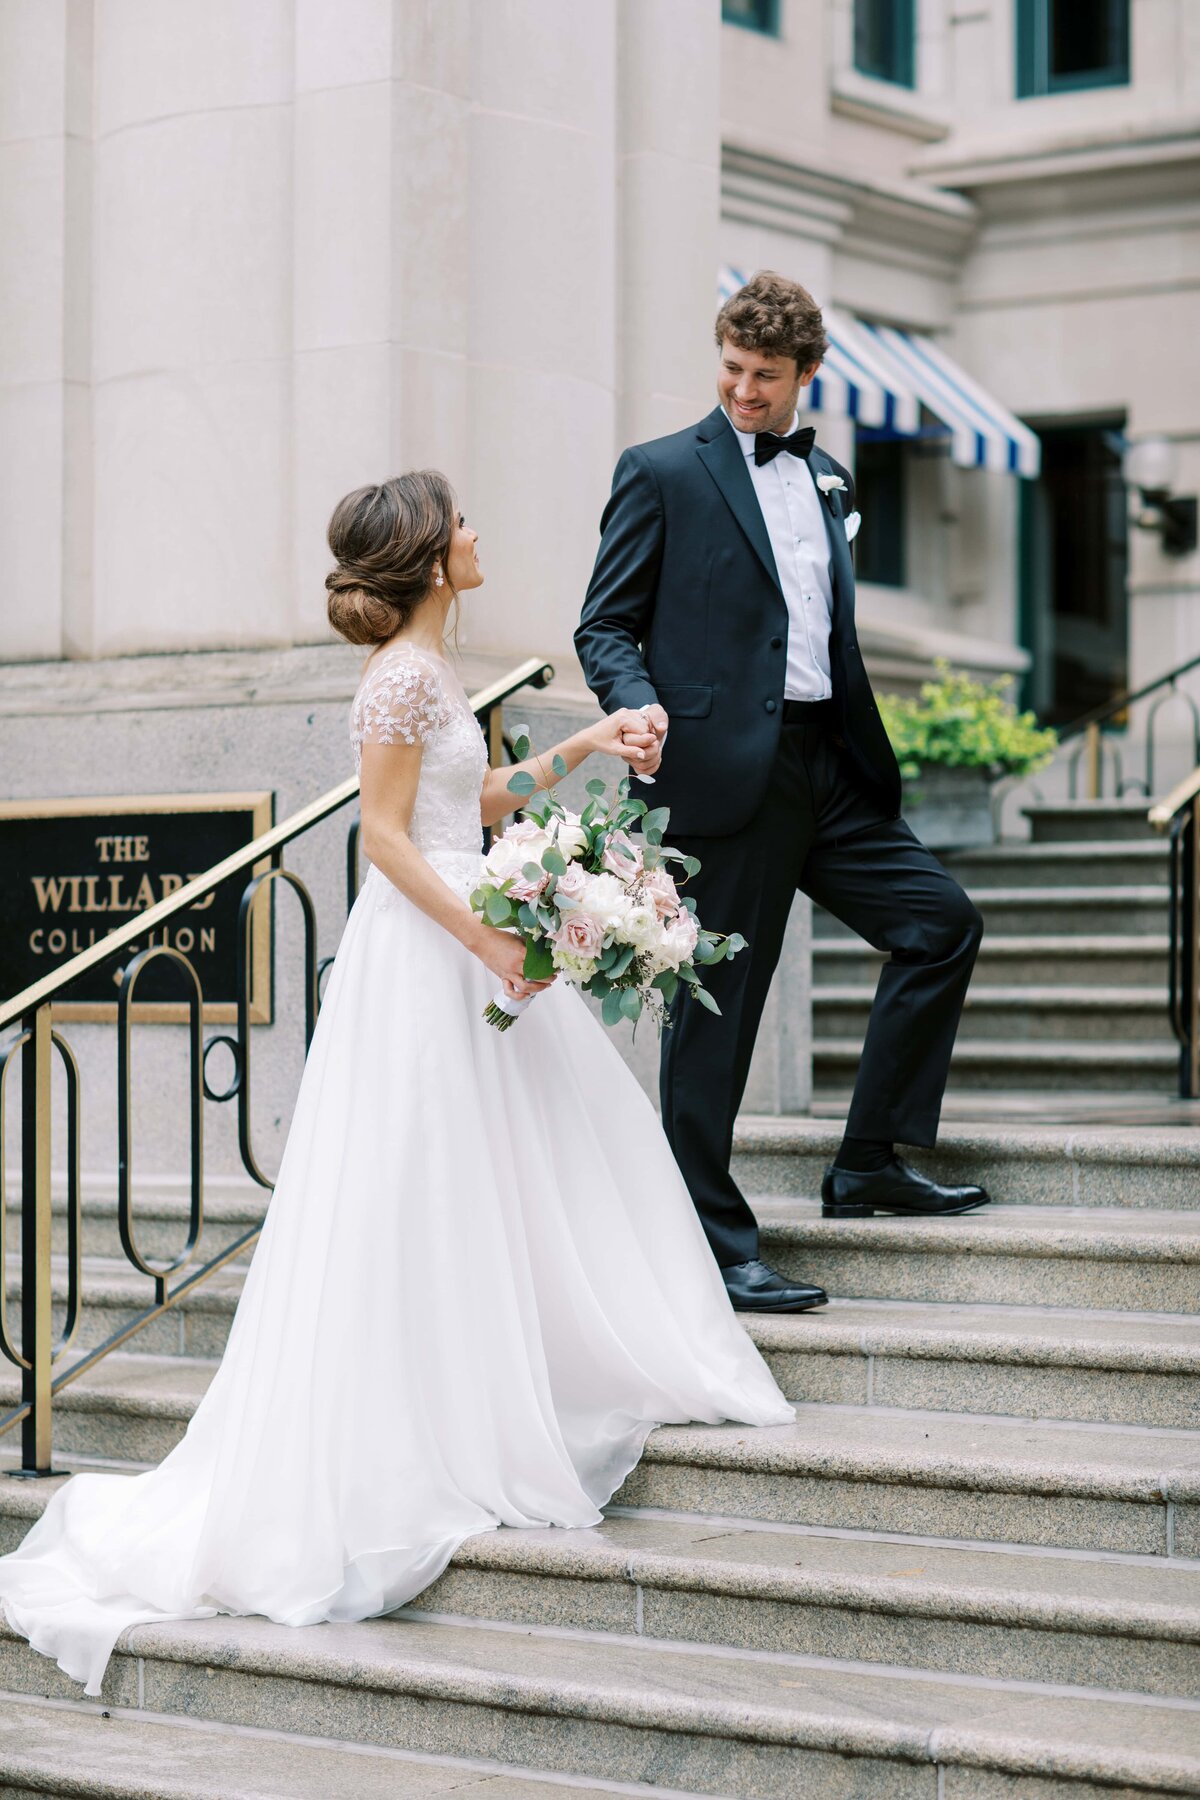 A handsome dark haired groom in a black tux escorts a bride in a white wedding gown holding a bouquet of pink peonies up the stairs of The Willard Hotel in Washington DC as they smile at each other